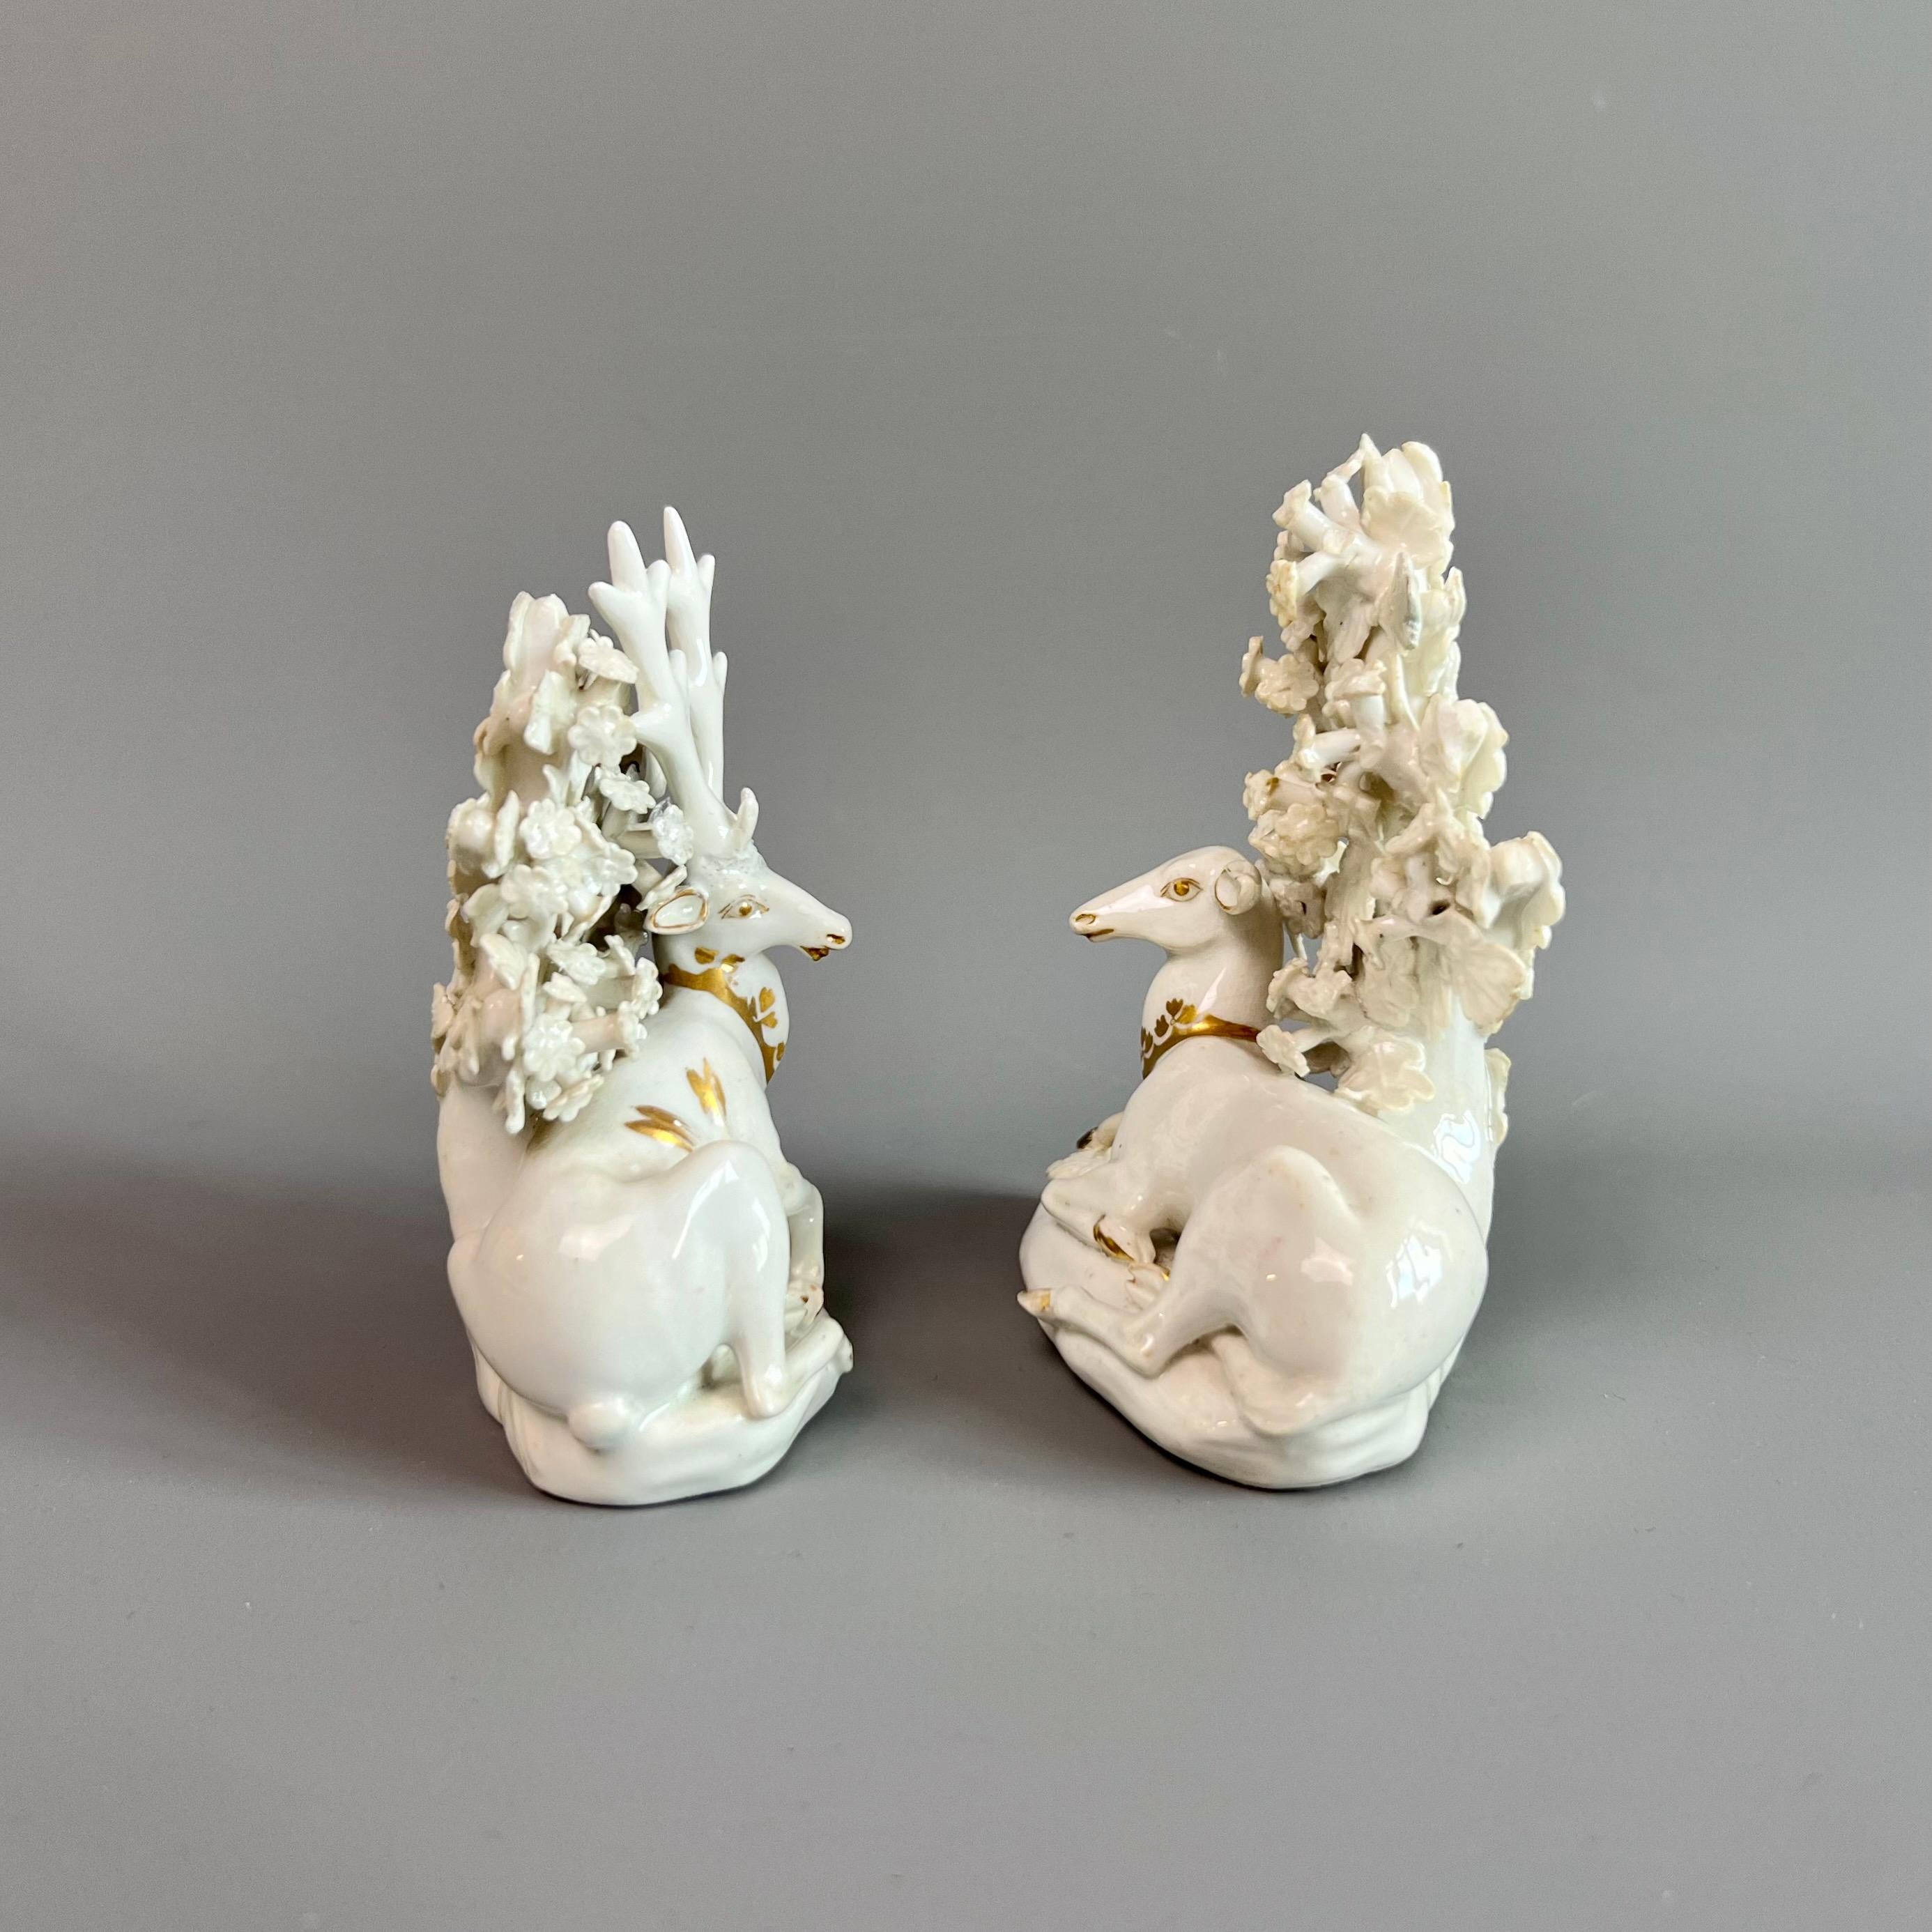 This is a very charming pair of porcelain figures of a stag and a doe, probably cast by Derby in about 1760 and decorated by Bloor Derby in 1820. The figures are a simple white porcelain with restrained gilt accents.

The Derby Porcelain factory